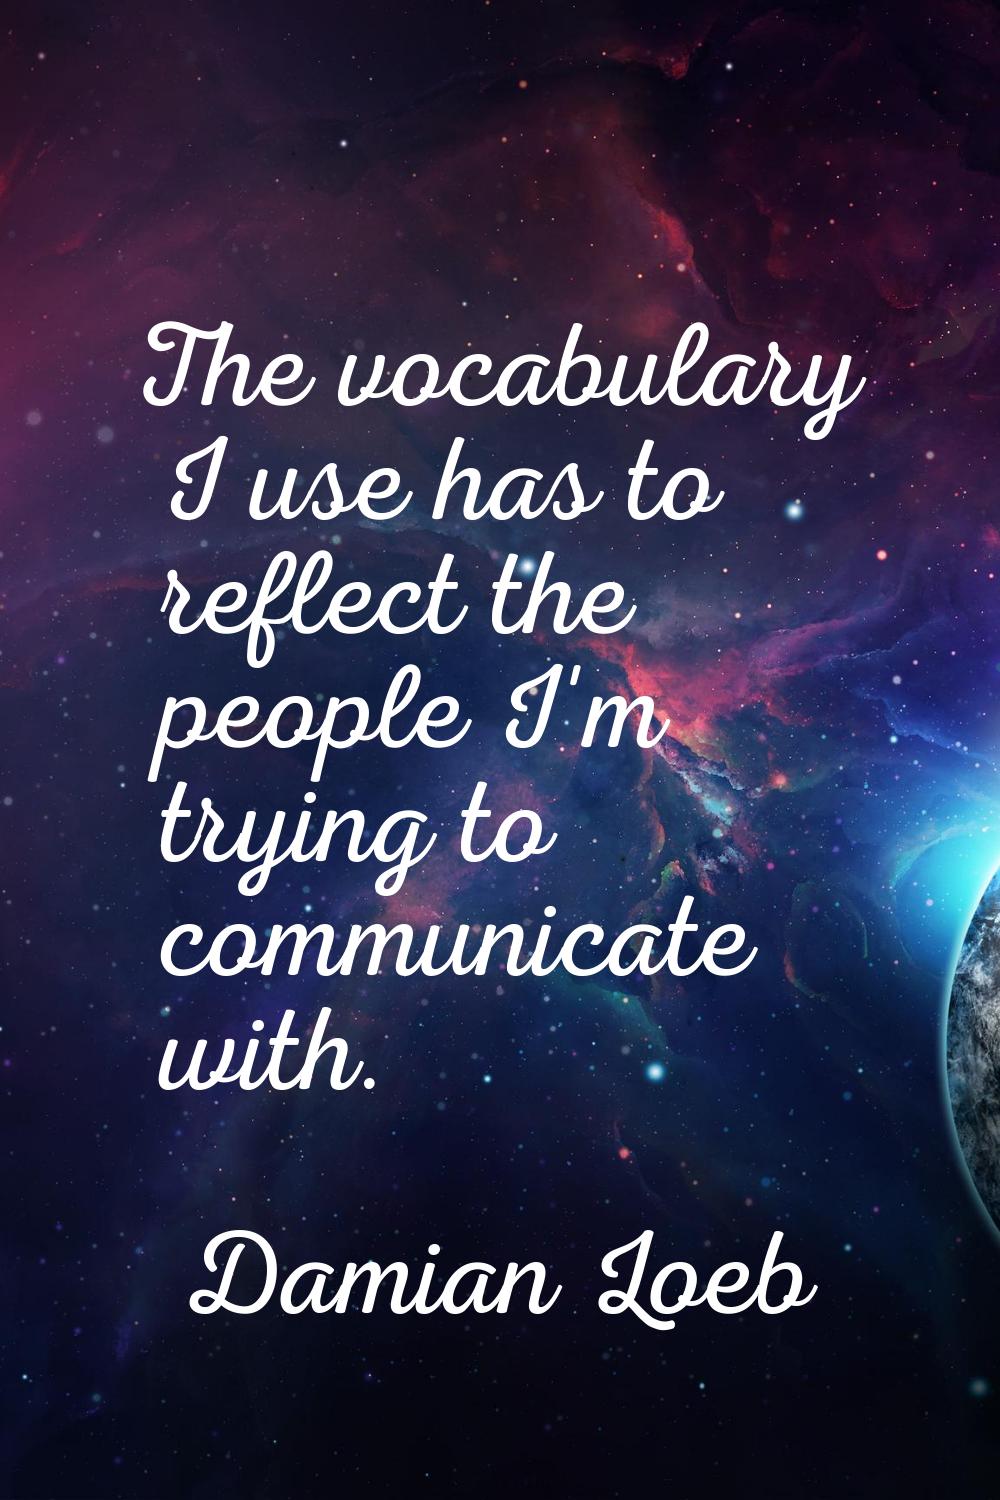 The vocabulary I use has to reflect the people I'm trying to communicate with.